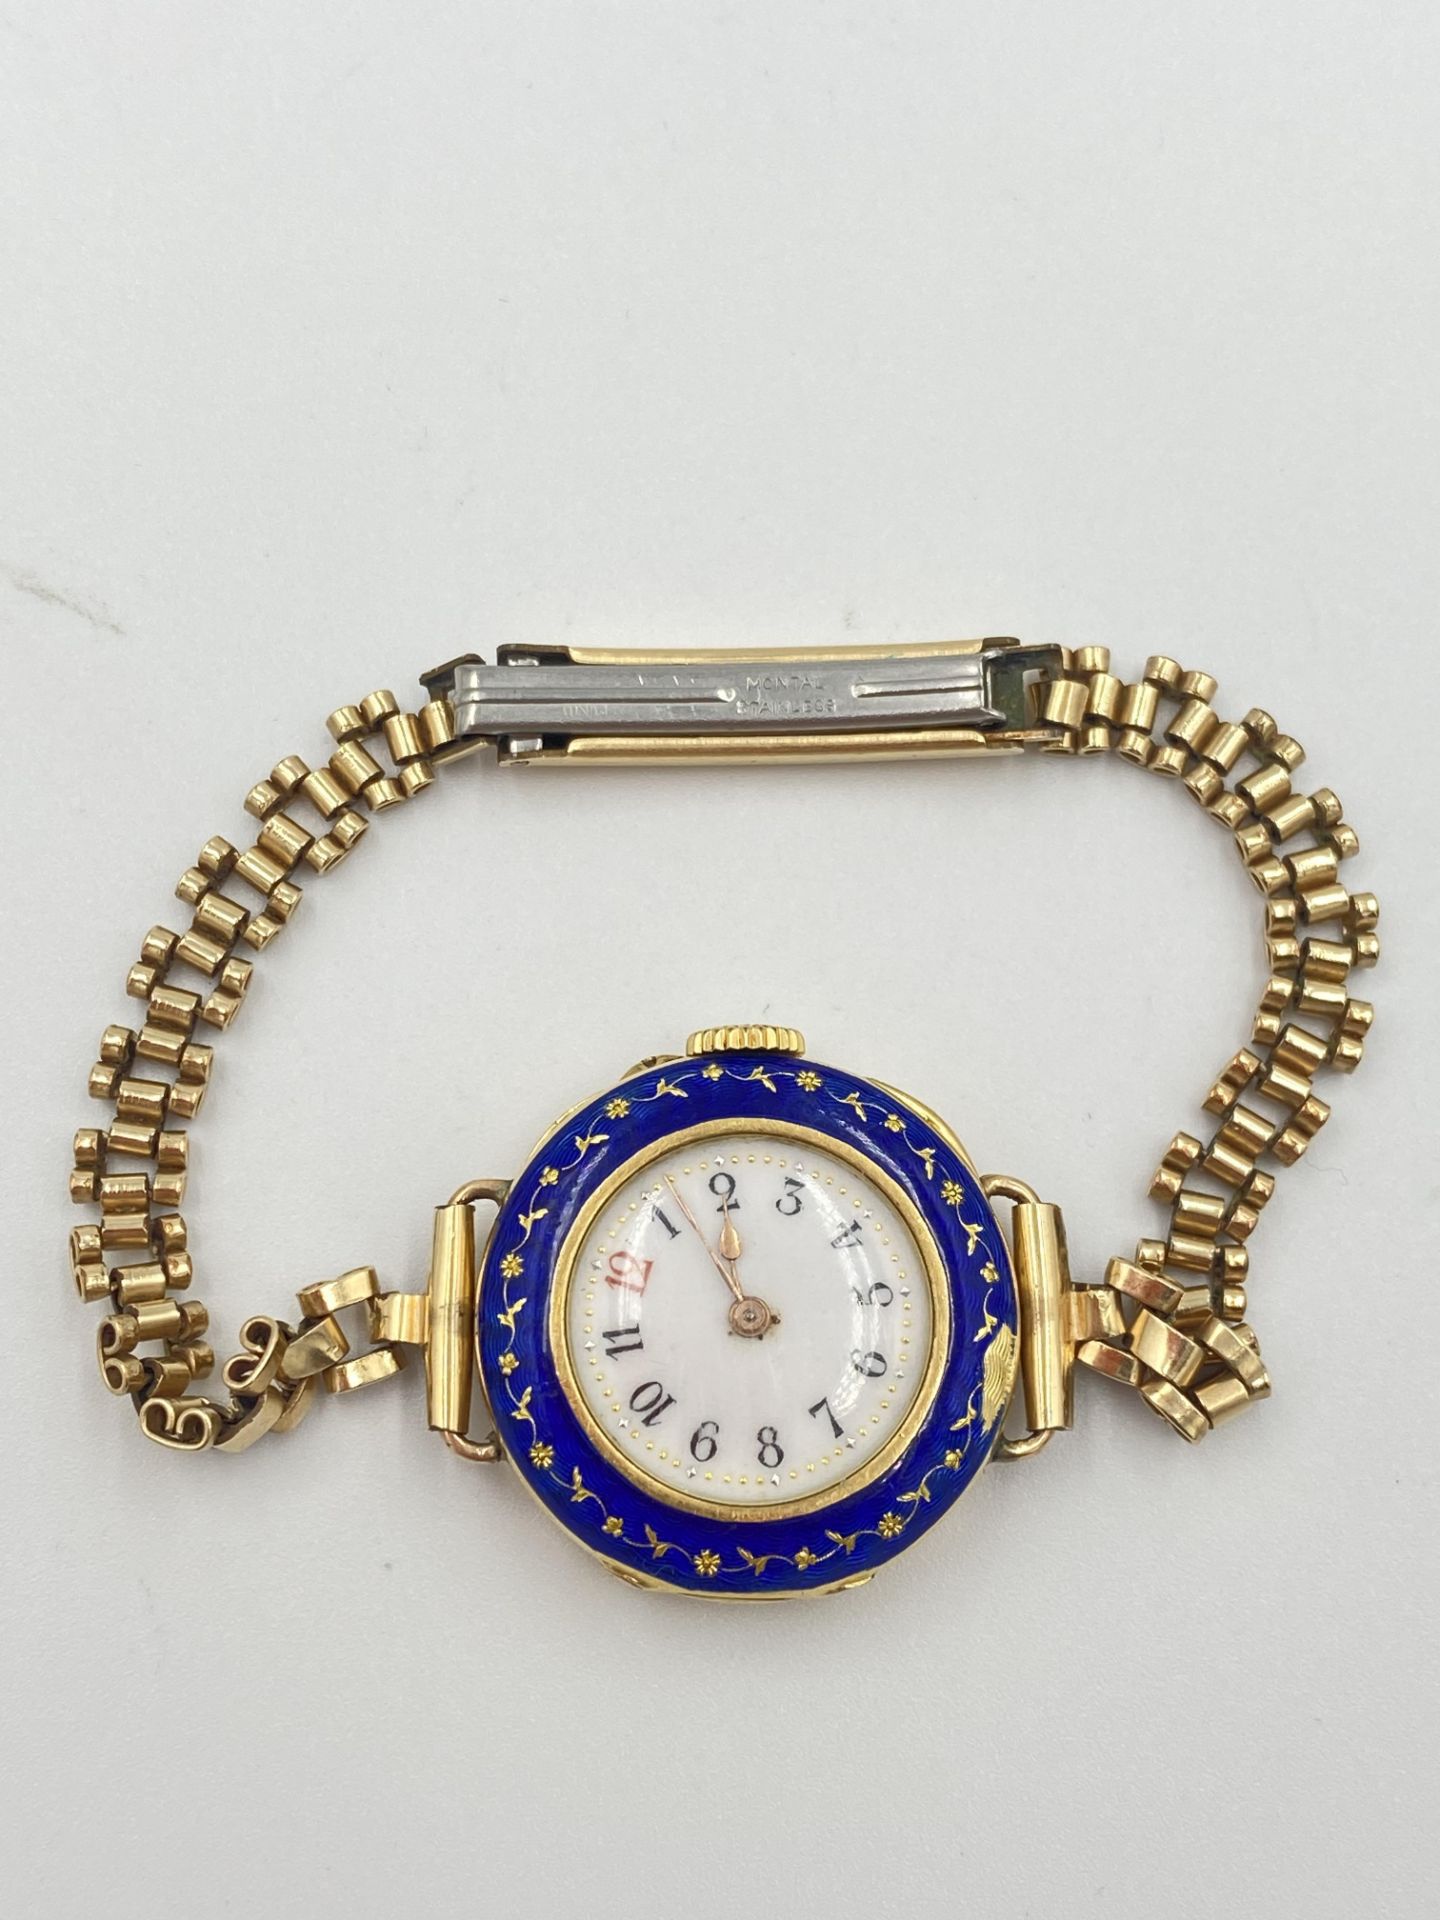 Ladies cocktail watch in 18ct gold case - Image 4 of 4